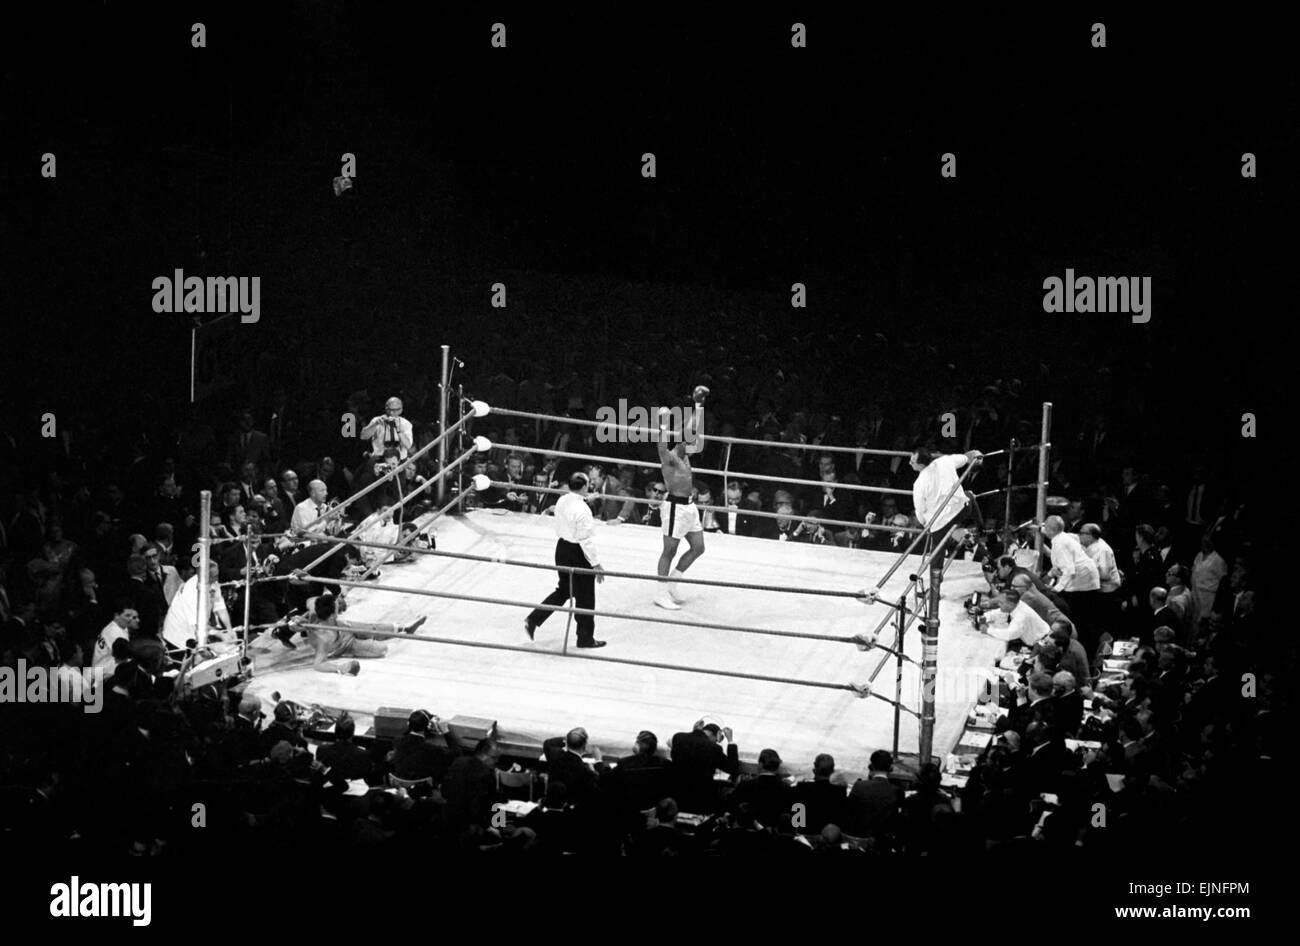 Boxing at Earls Court. Brian London v. Cassius Clay. Clay celebrates after knocking out London 1minute 40 into the third round. 6th August 1966 Stock Photo